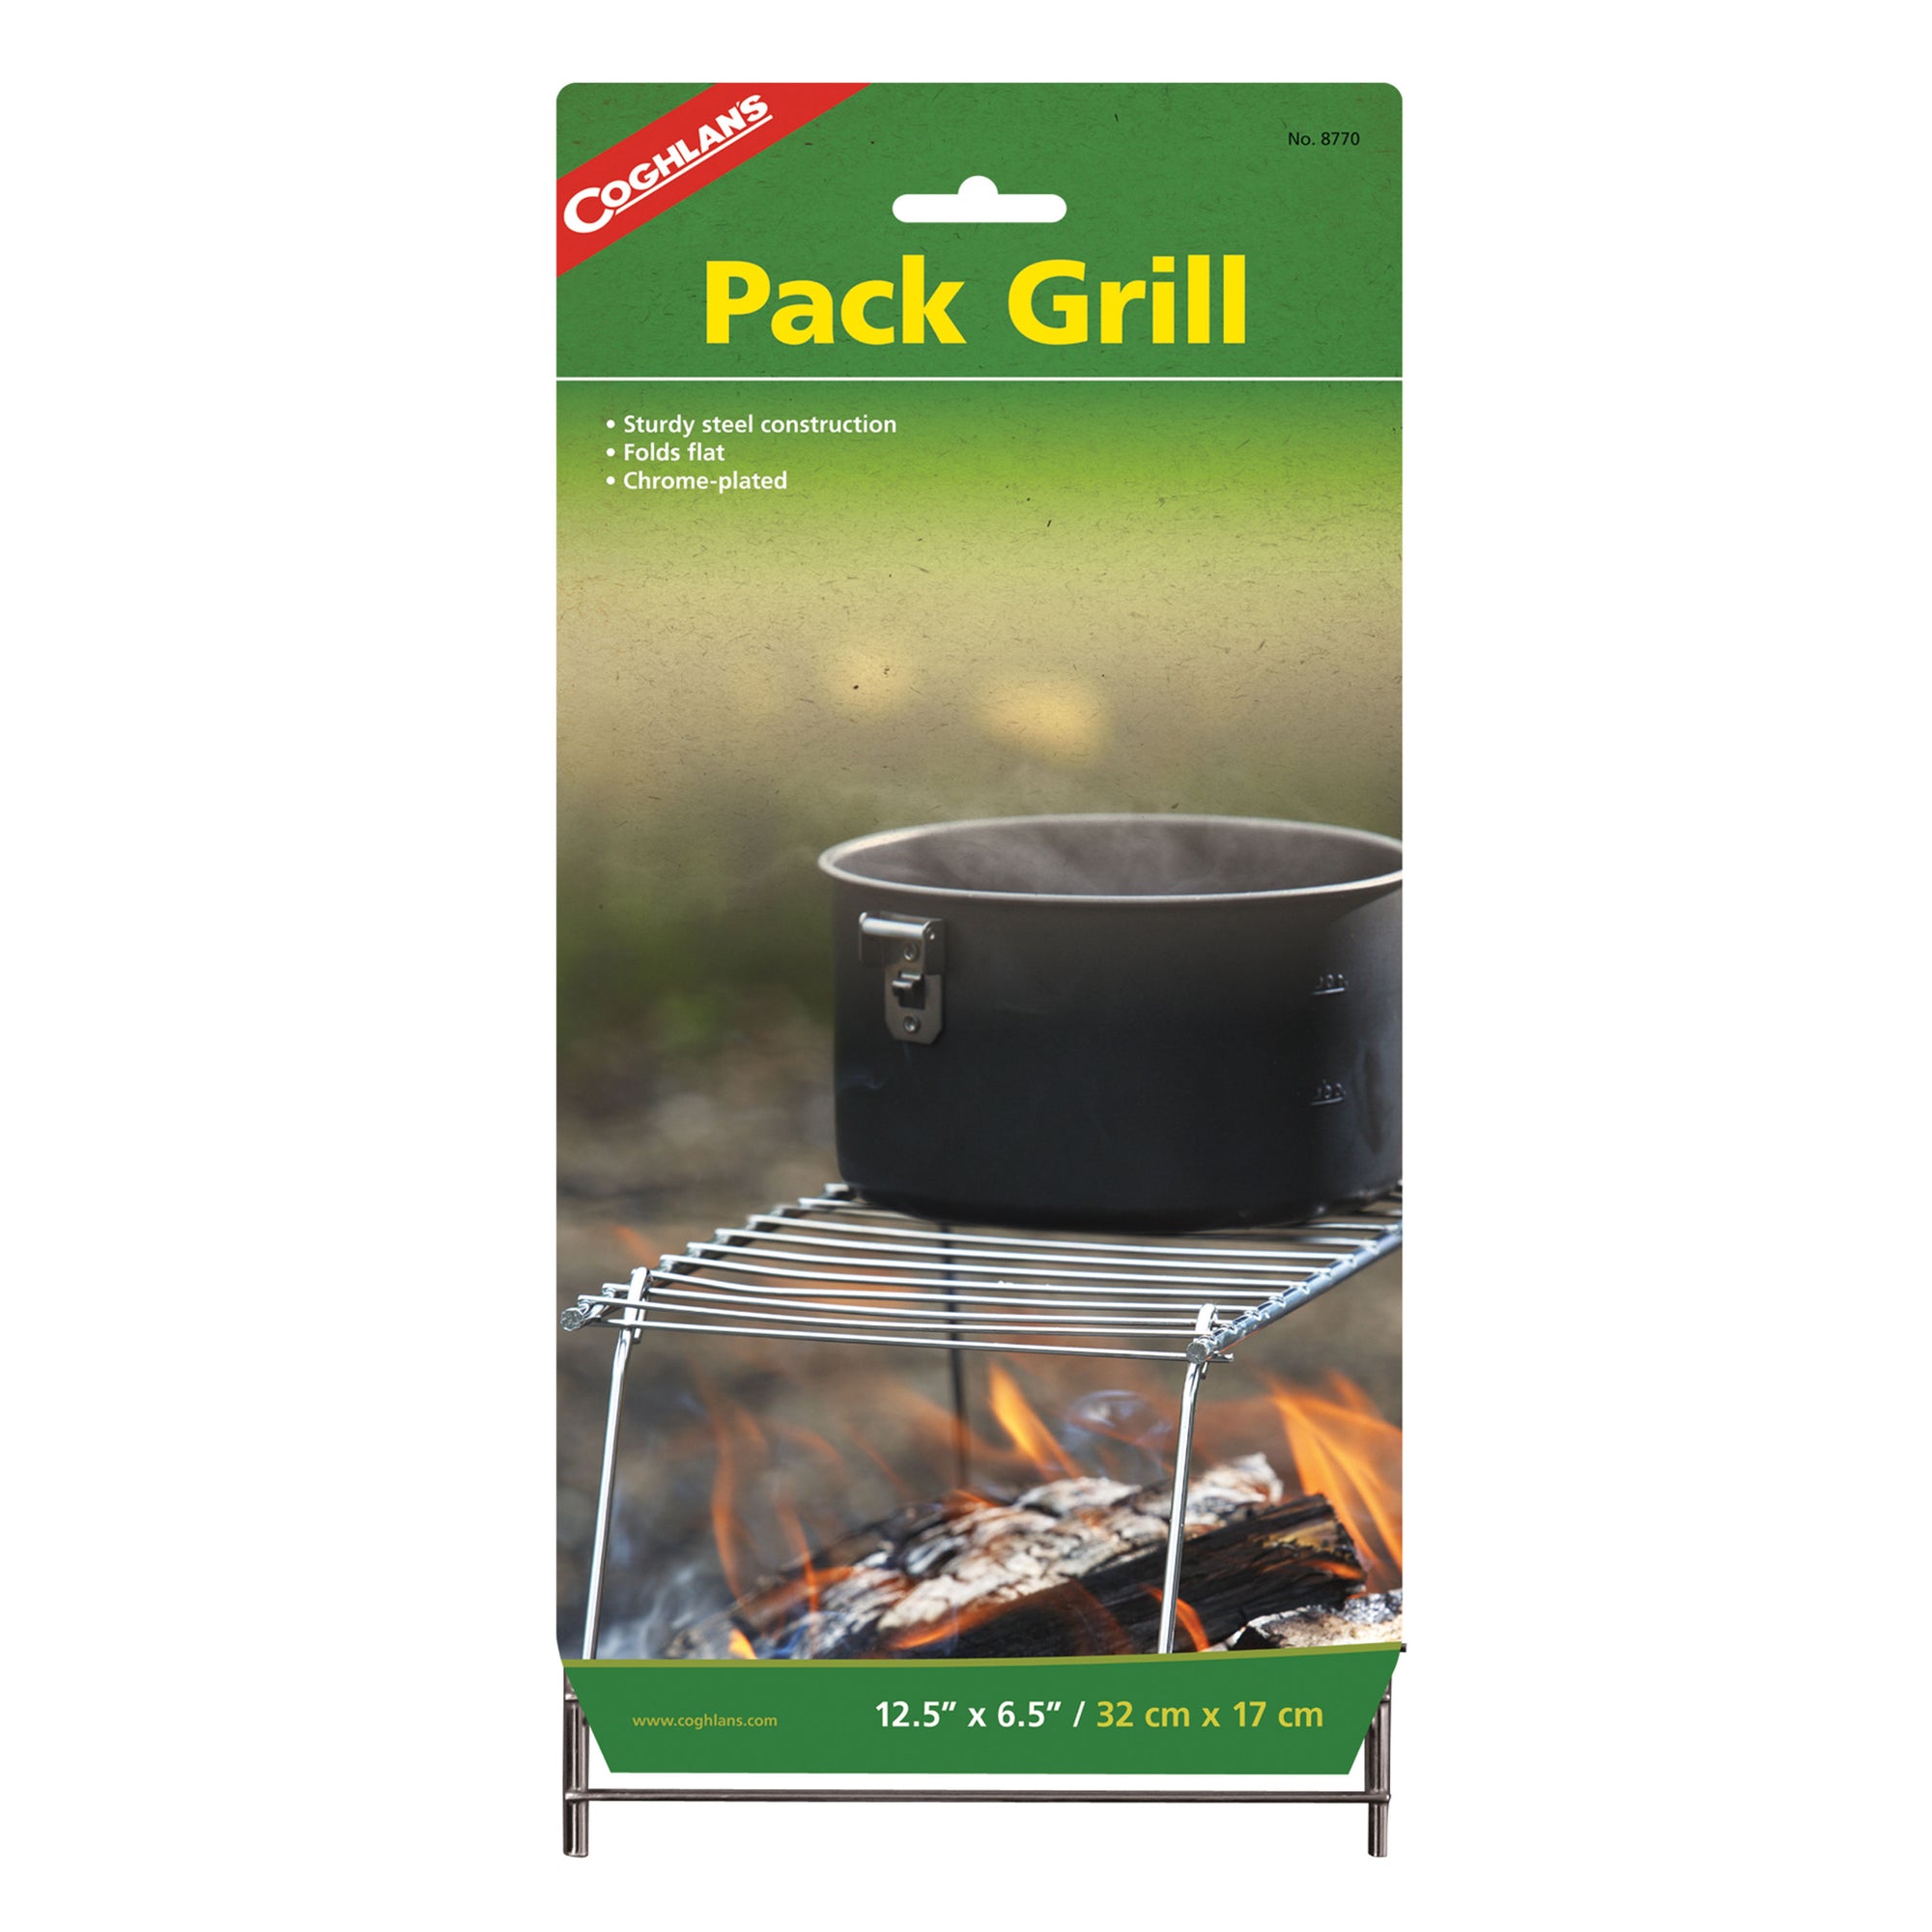 Coghlan's 8770 Pack Grill